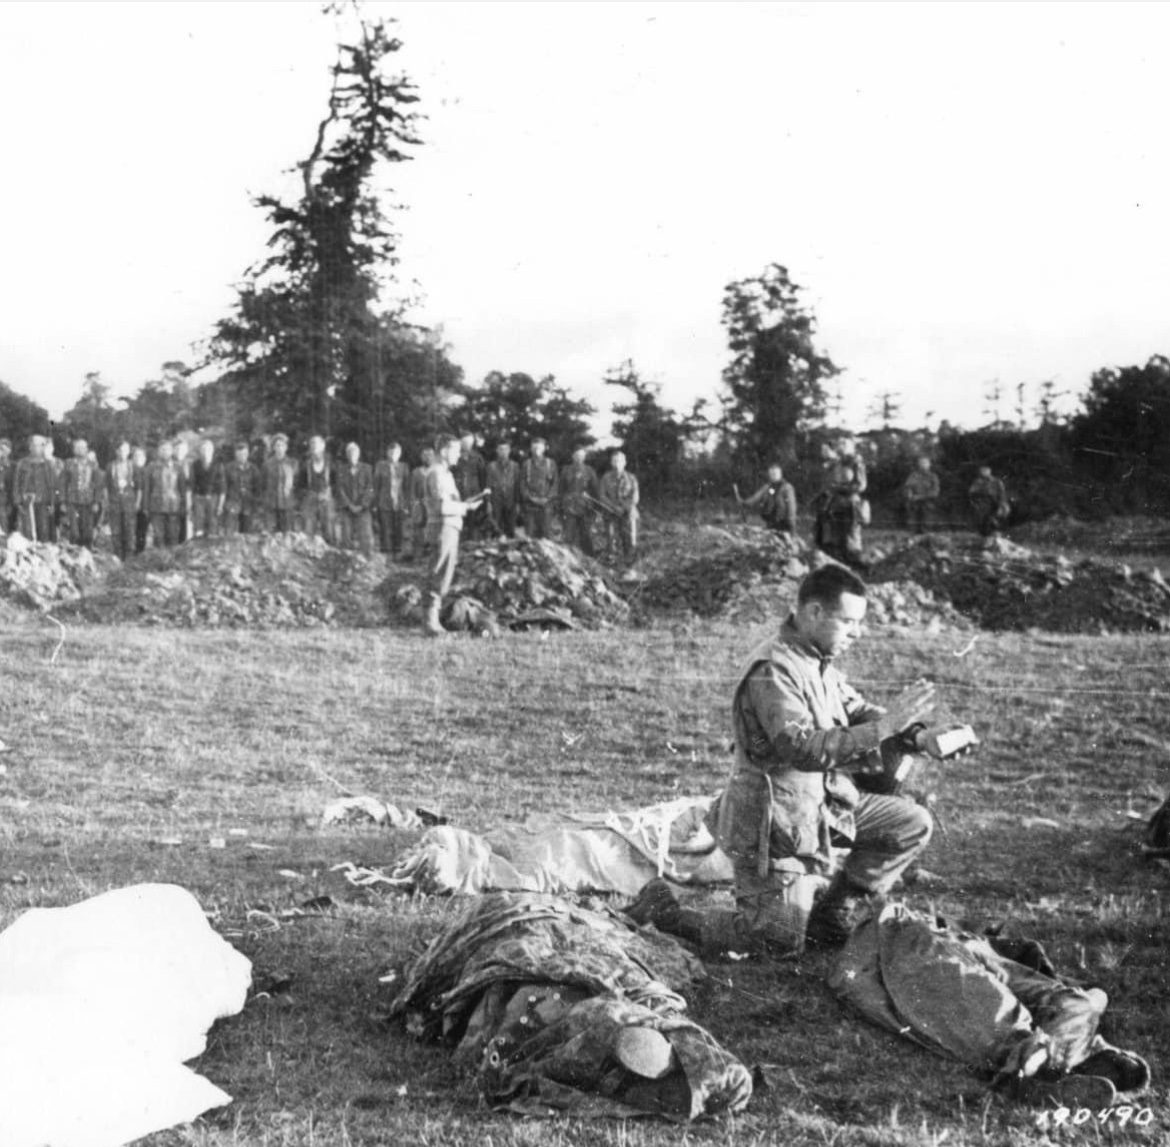 While a burial party of German POWs awaits to complete their assignment, Paratrooper and Regimental Chaplain with the 101st Airborne (501st PIR), Father Francis Sampson, gives last rites to paratroopers killed in the Battle of Carentan in June of 1944. 🪂